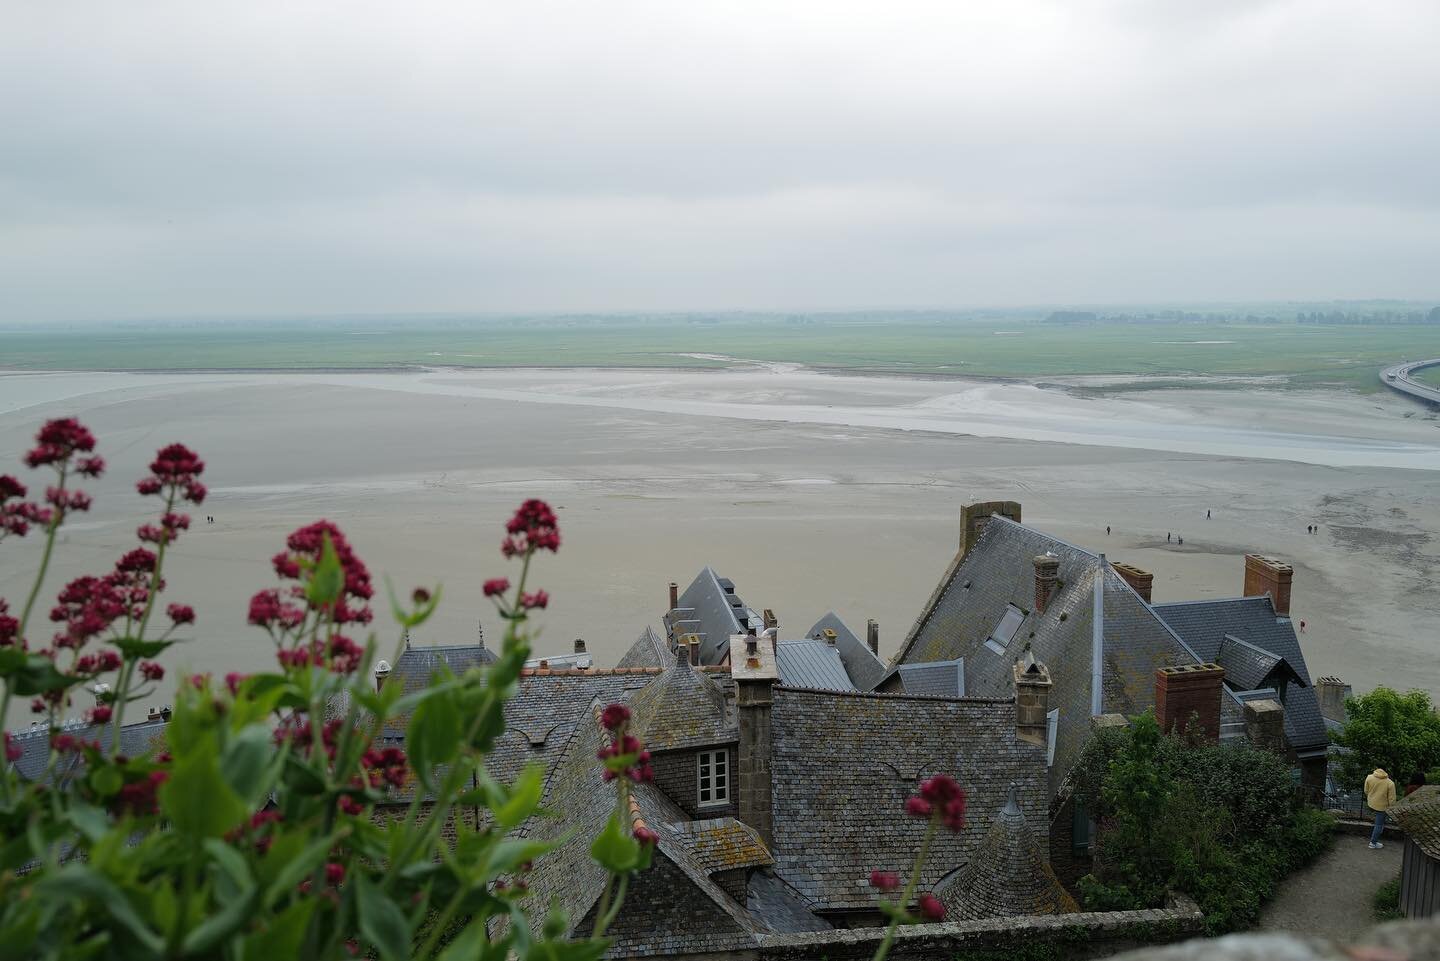 Mont Saint-Michel is a mood in itself, and there was no better way to capture it than with my moody Leica camera 📸 

#montsaintmichel #montsaintmichelabbey #normandie #normandietourisme #travelnowkids #theadventuresofchiaraserafinaandfabrizio